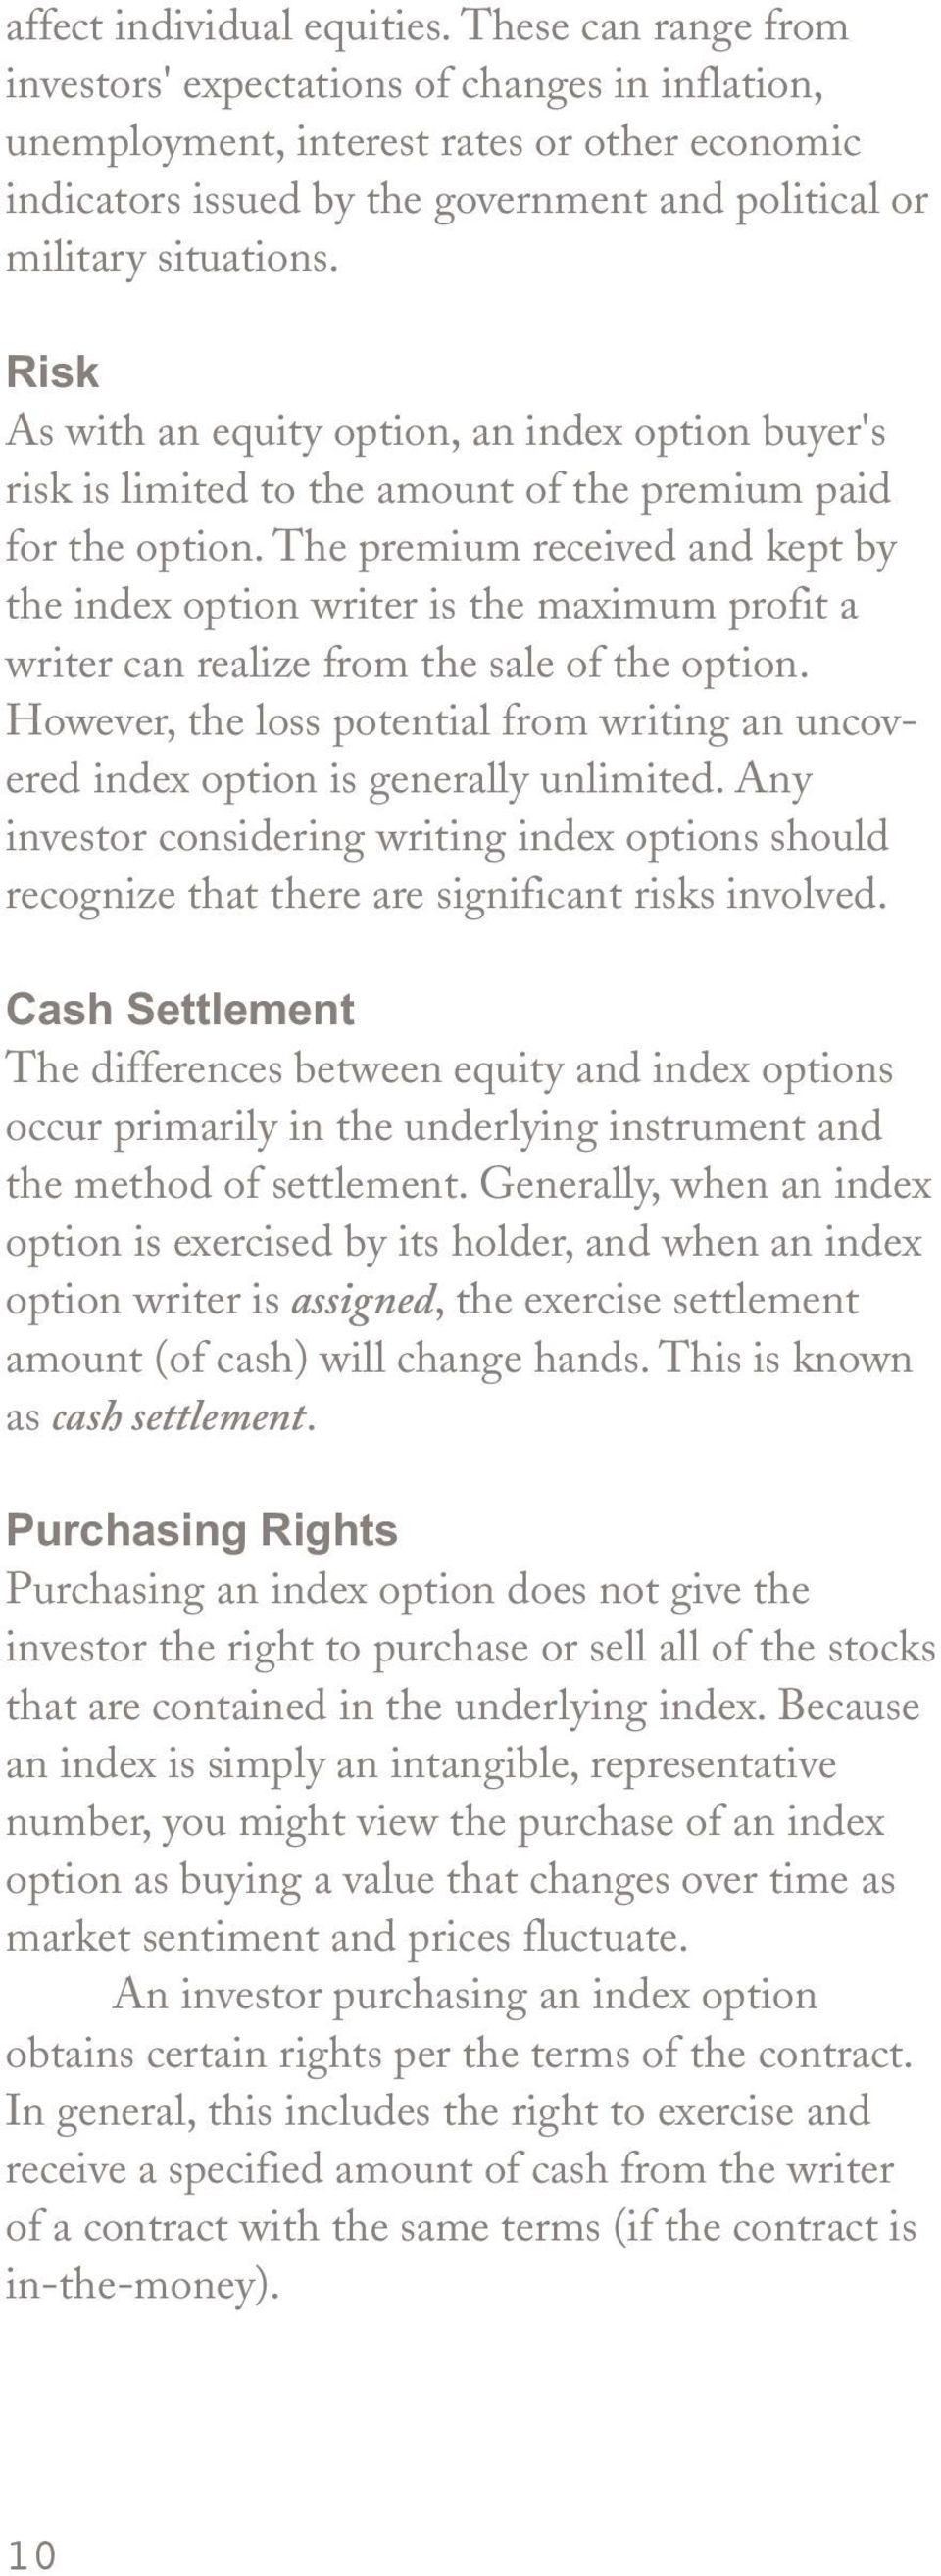 Risk As with an equity option, an index option buyer's risk is limited to the amount of the premium paid for the option.